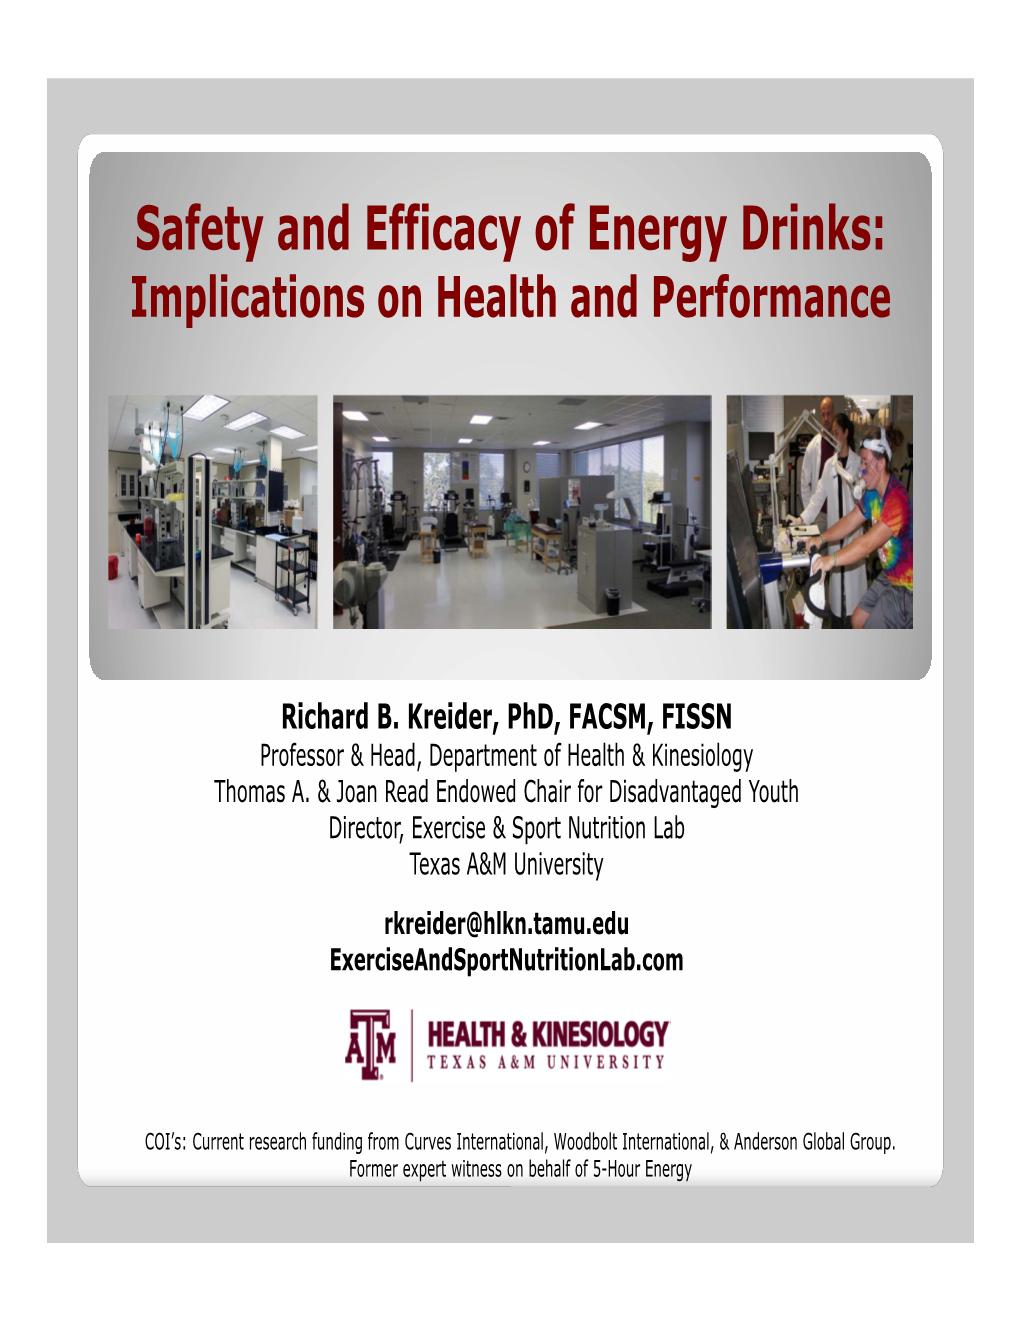 Energy Drinks: Implications on Health and Performance